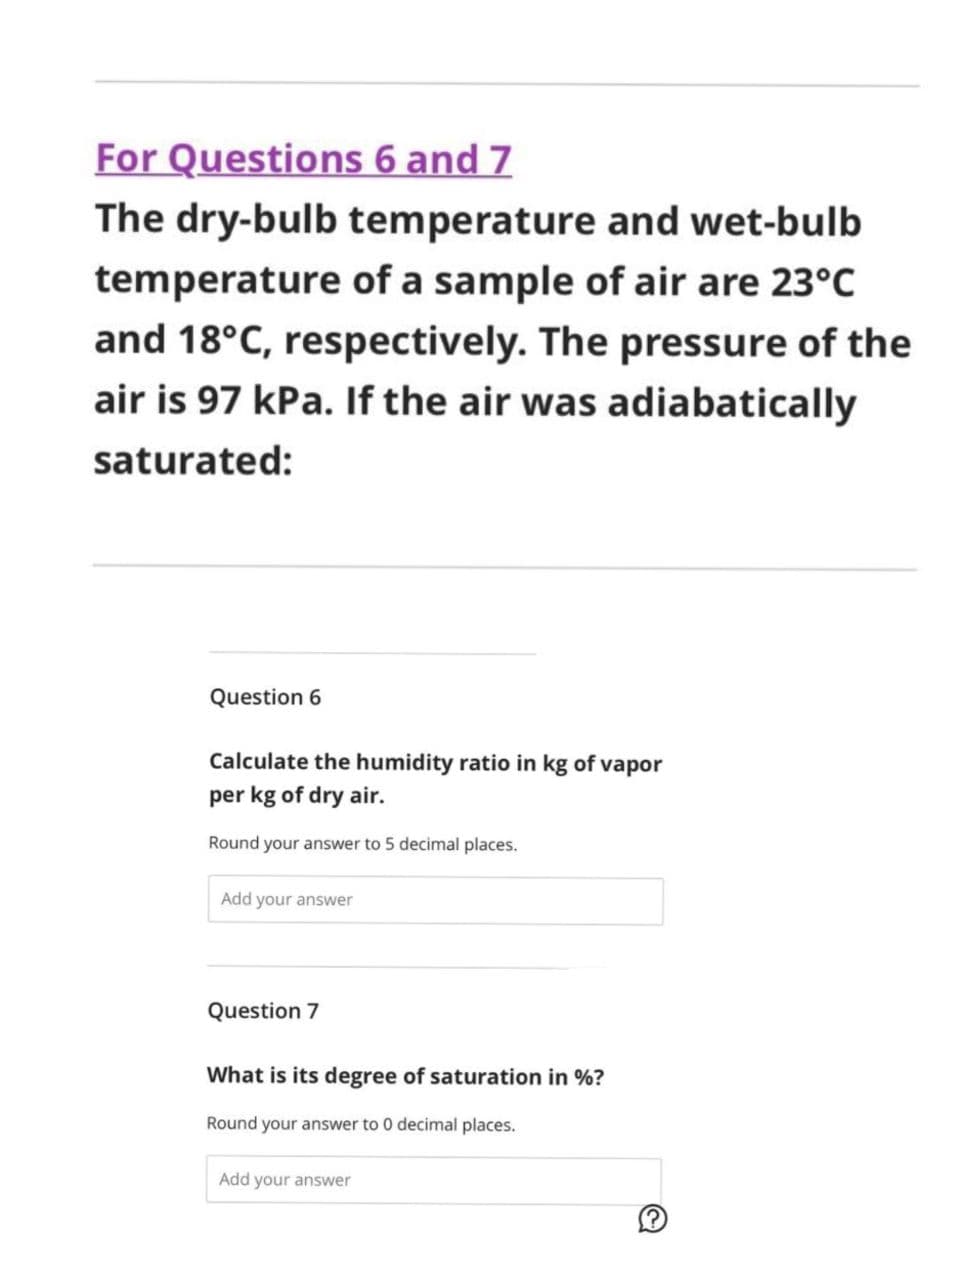 For Questions 6 and 7
The dry-bulb temperature and wet-bulb
temperature of a sample of air are 23°C
and 18°C, respectively. The pressure of the
air is 97 kPa. If the air was adiabatically
saturated:
Question 6
Calculate the humidity ratio in kg of vapor
per kg of dry air.
Round your answer to 5 decimal places.
Add your answer
Question 7
What is its degree of saturation in %?
Round your answer to 0 decimal places.
Add your answer